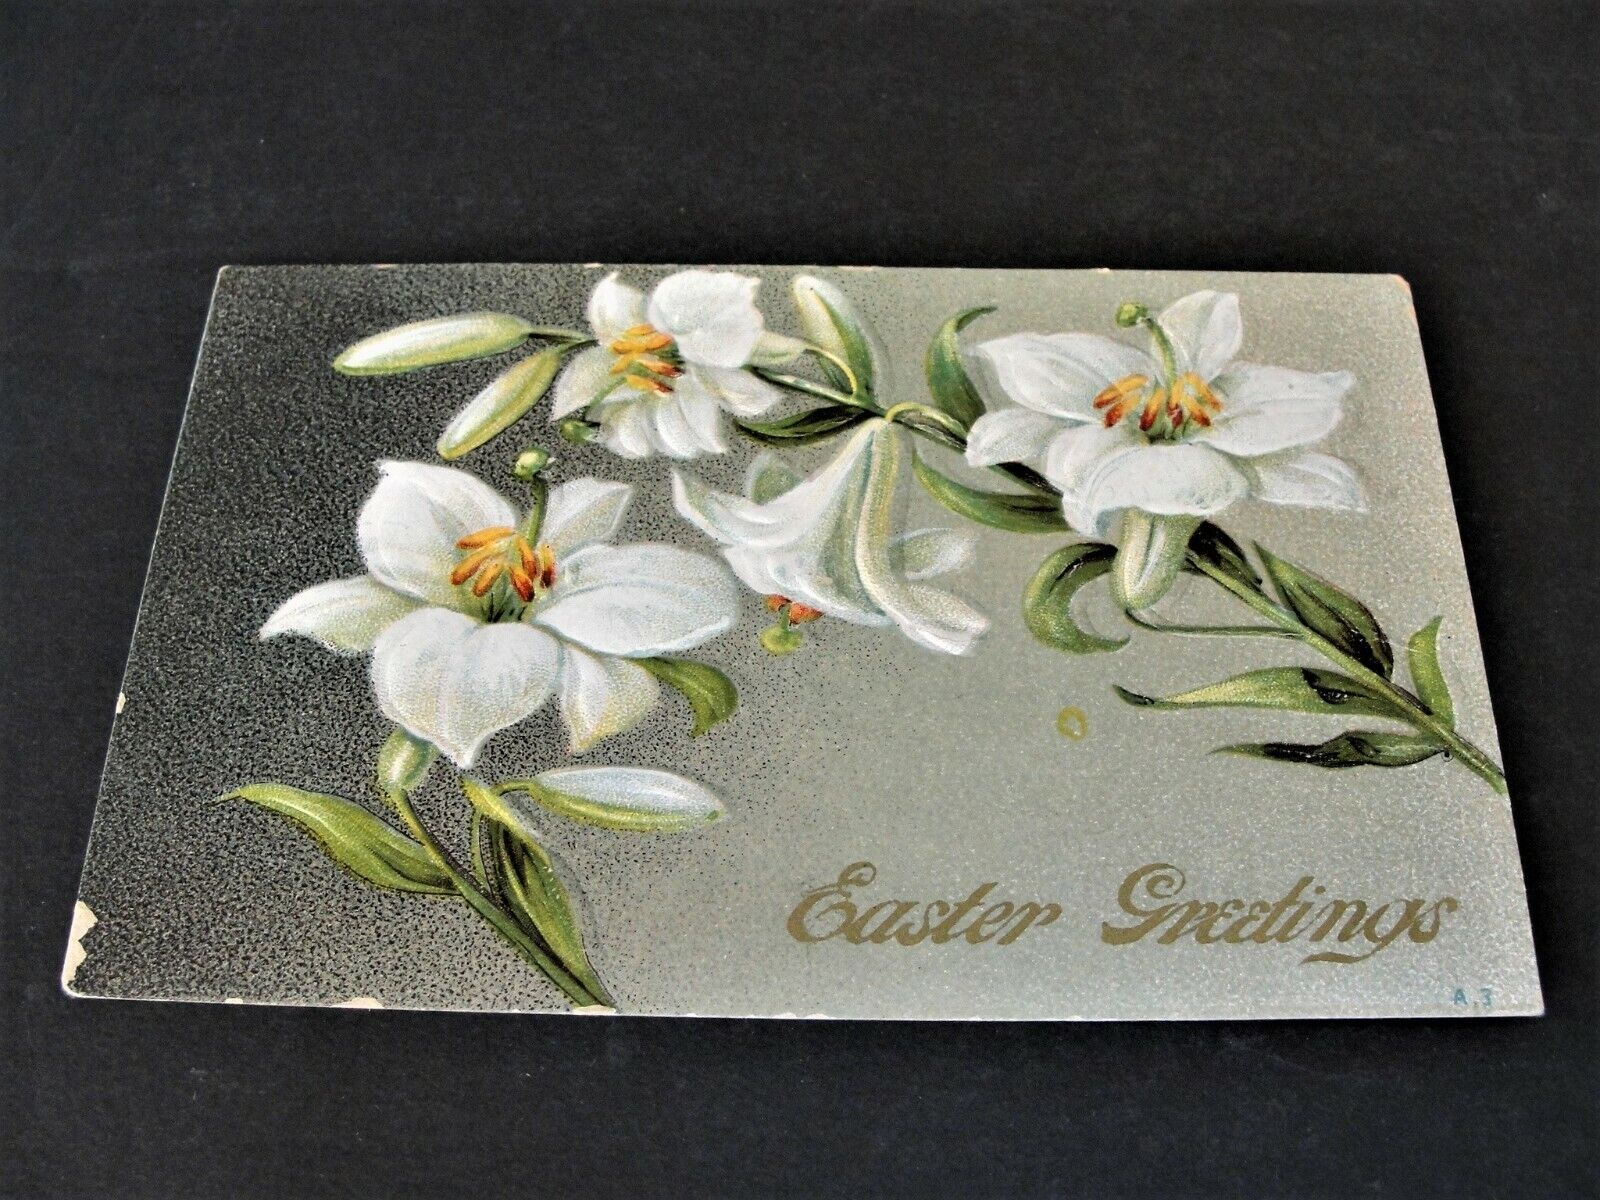 Easter Greetings, Best wishes- 1900s Divided Back Era-Embossed Postcard.  